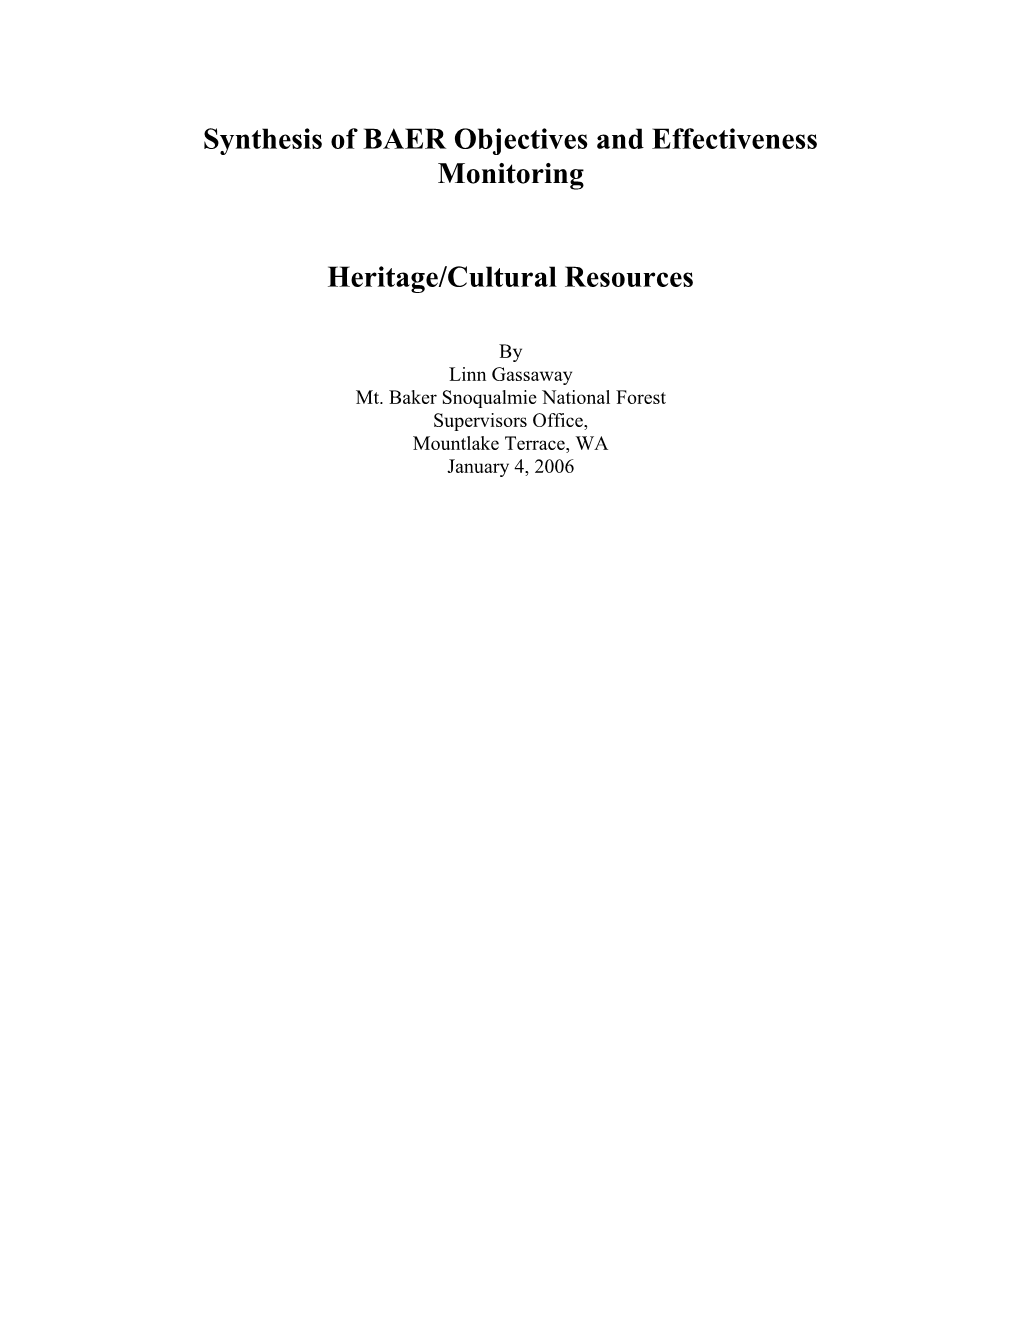 Heritage/Cultural Resources